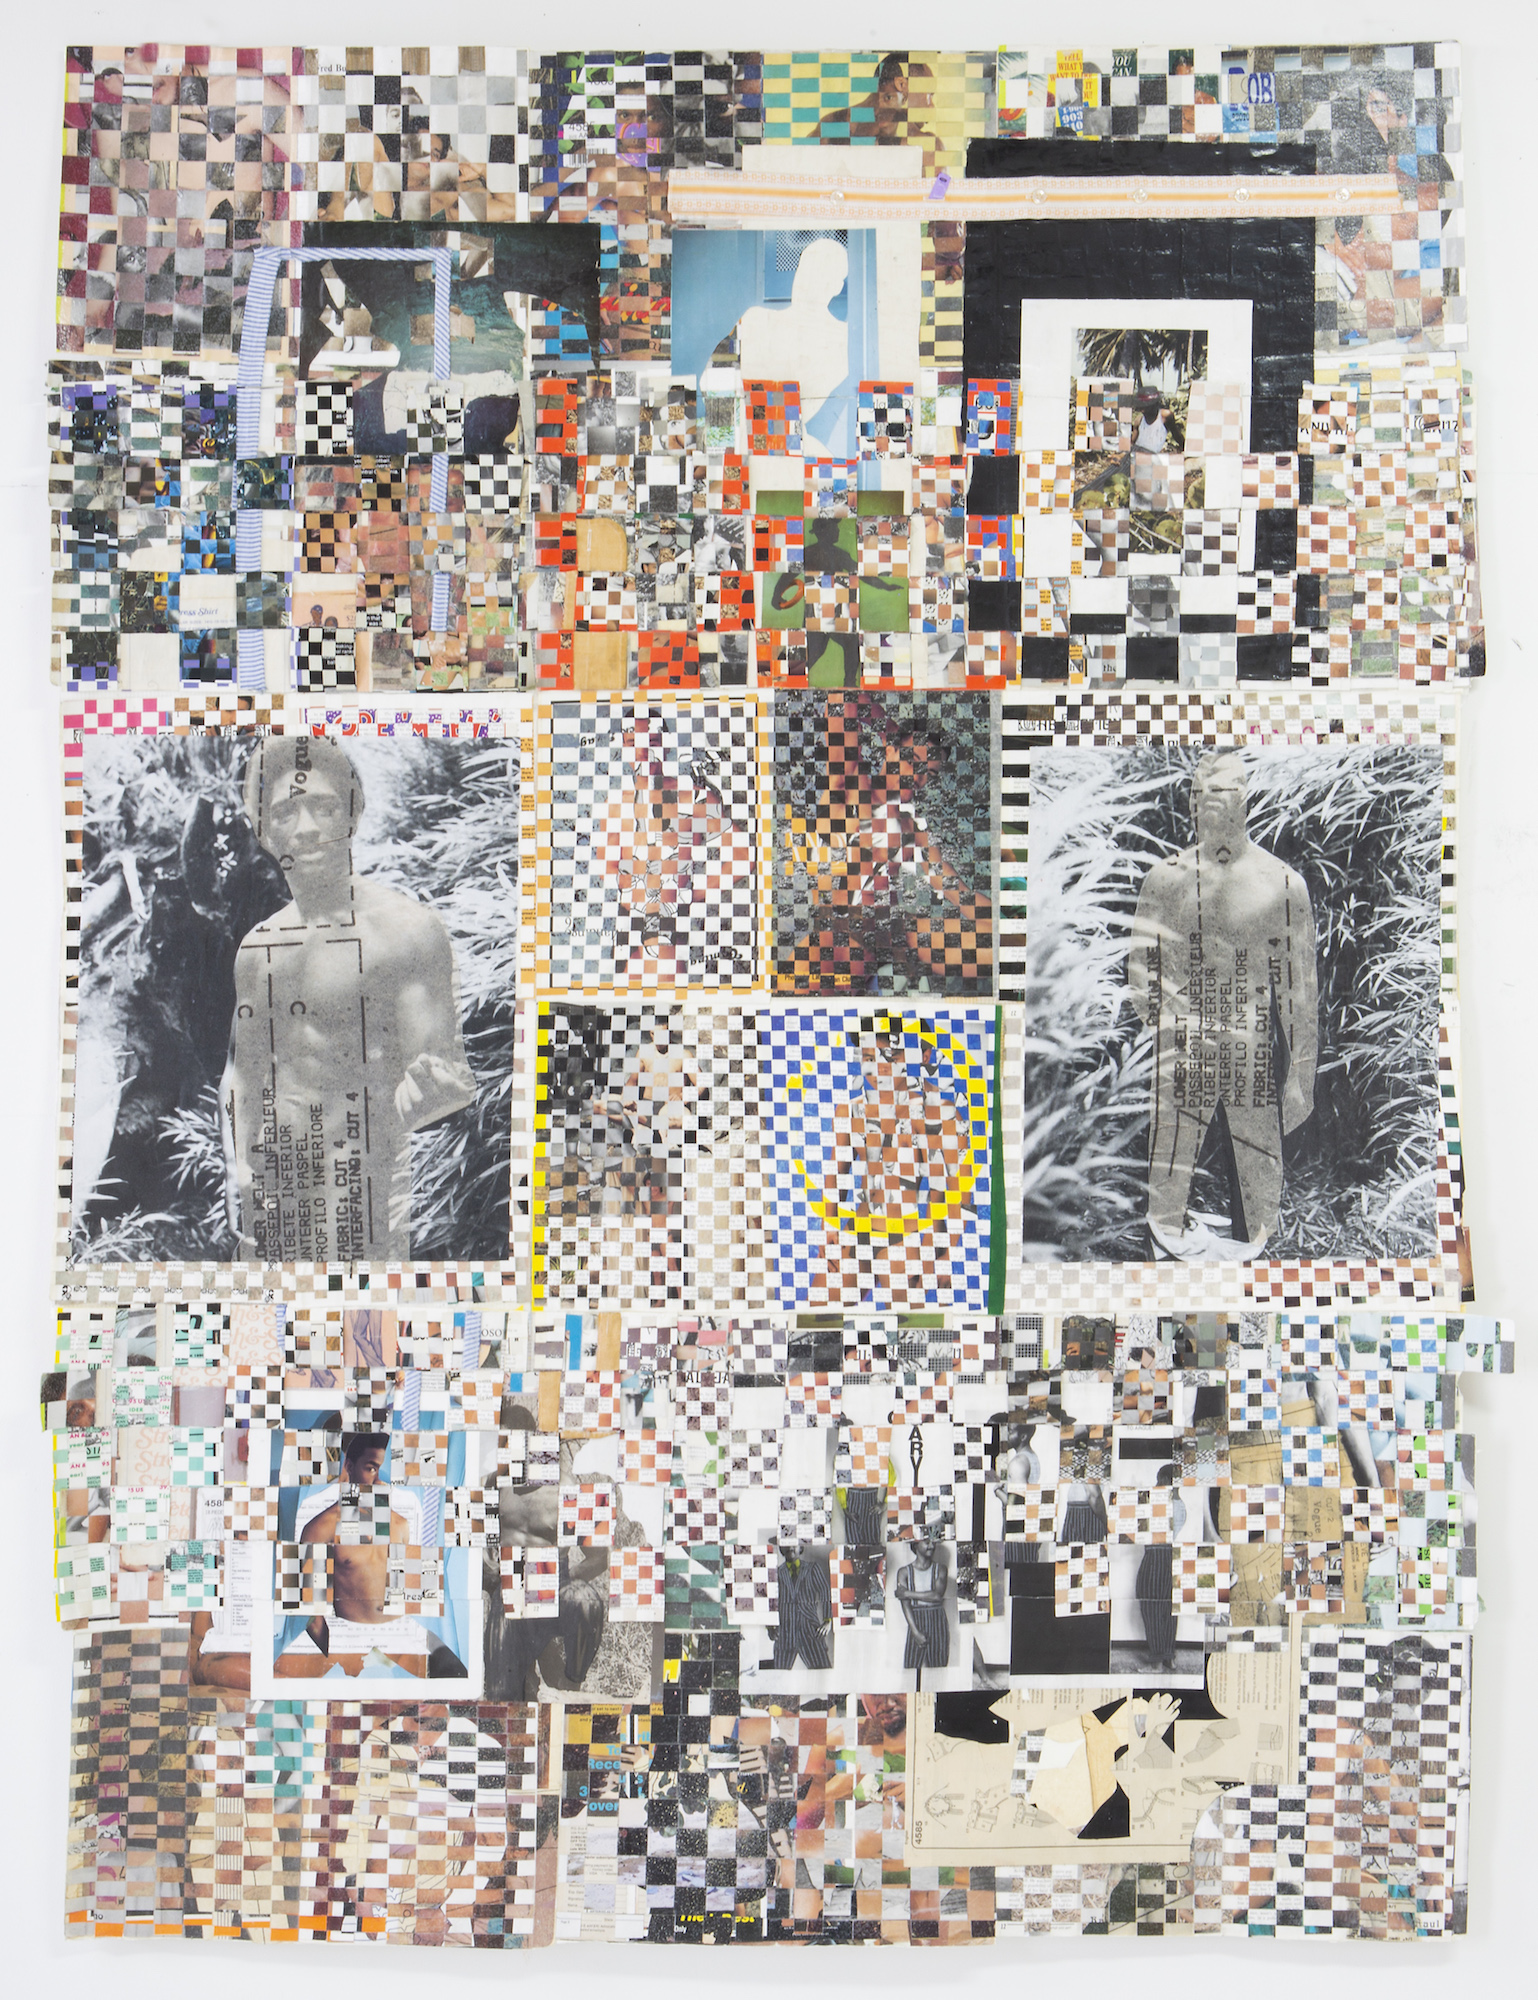 A multi medium collage in which images of men are distorted and obscured through the use of tiling.